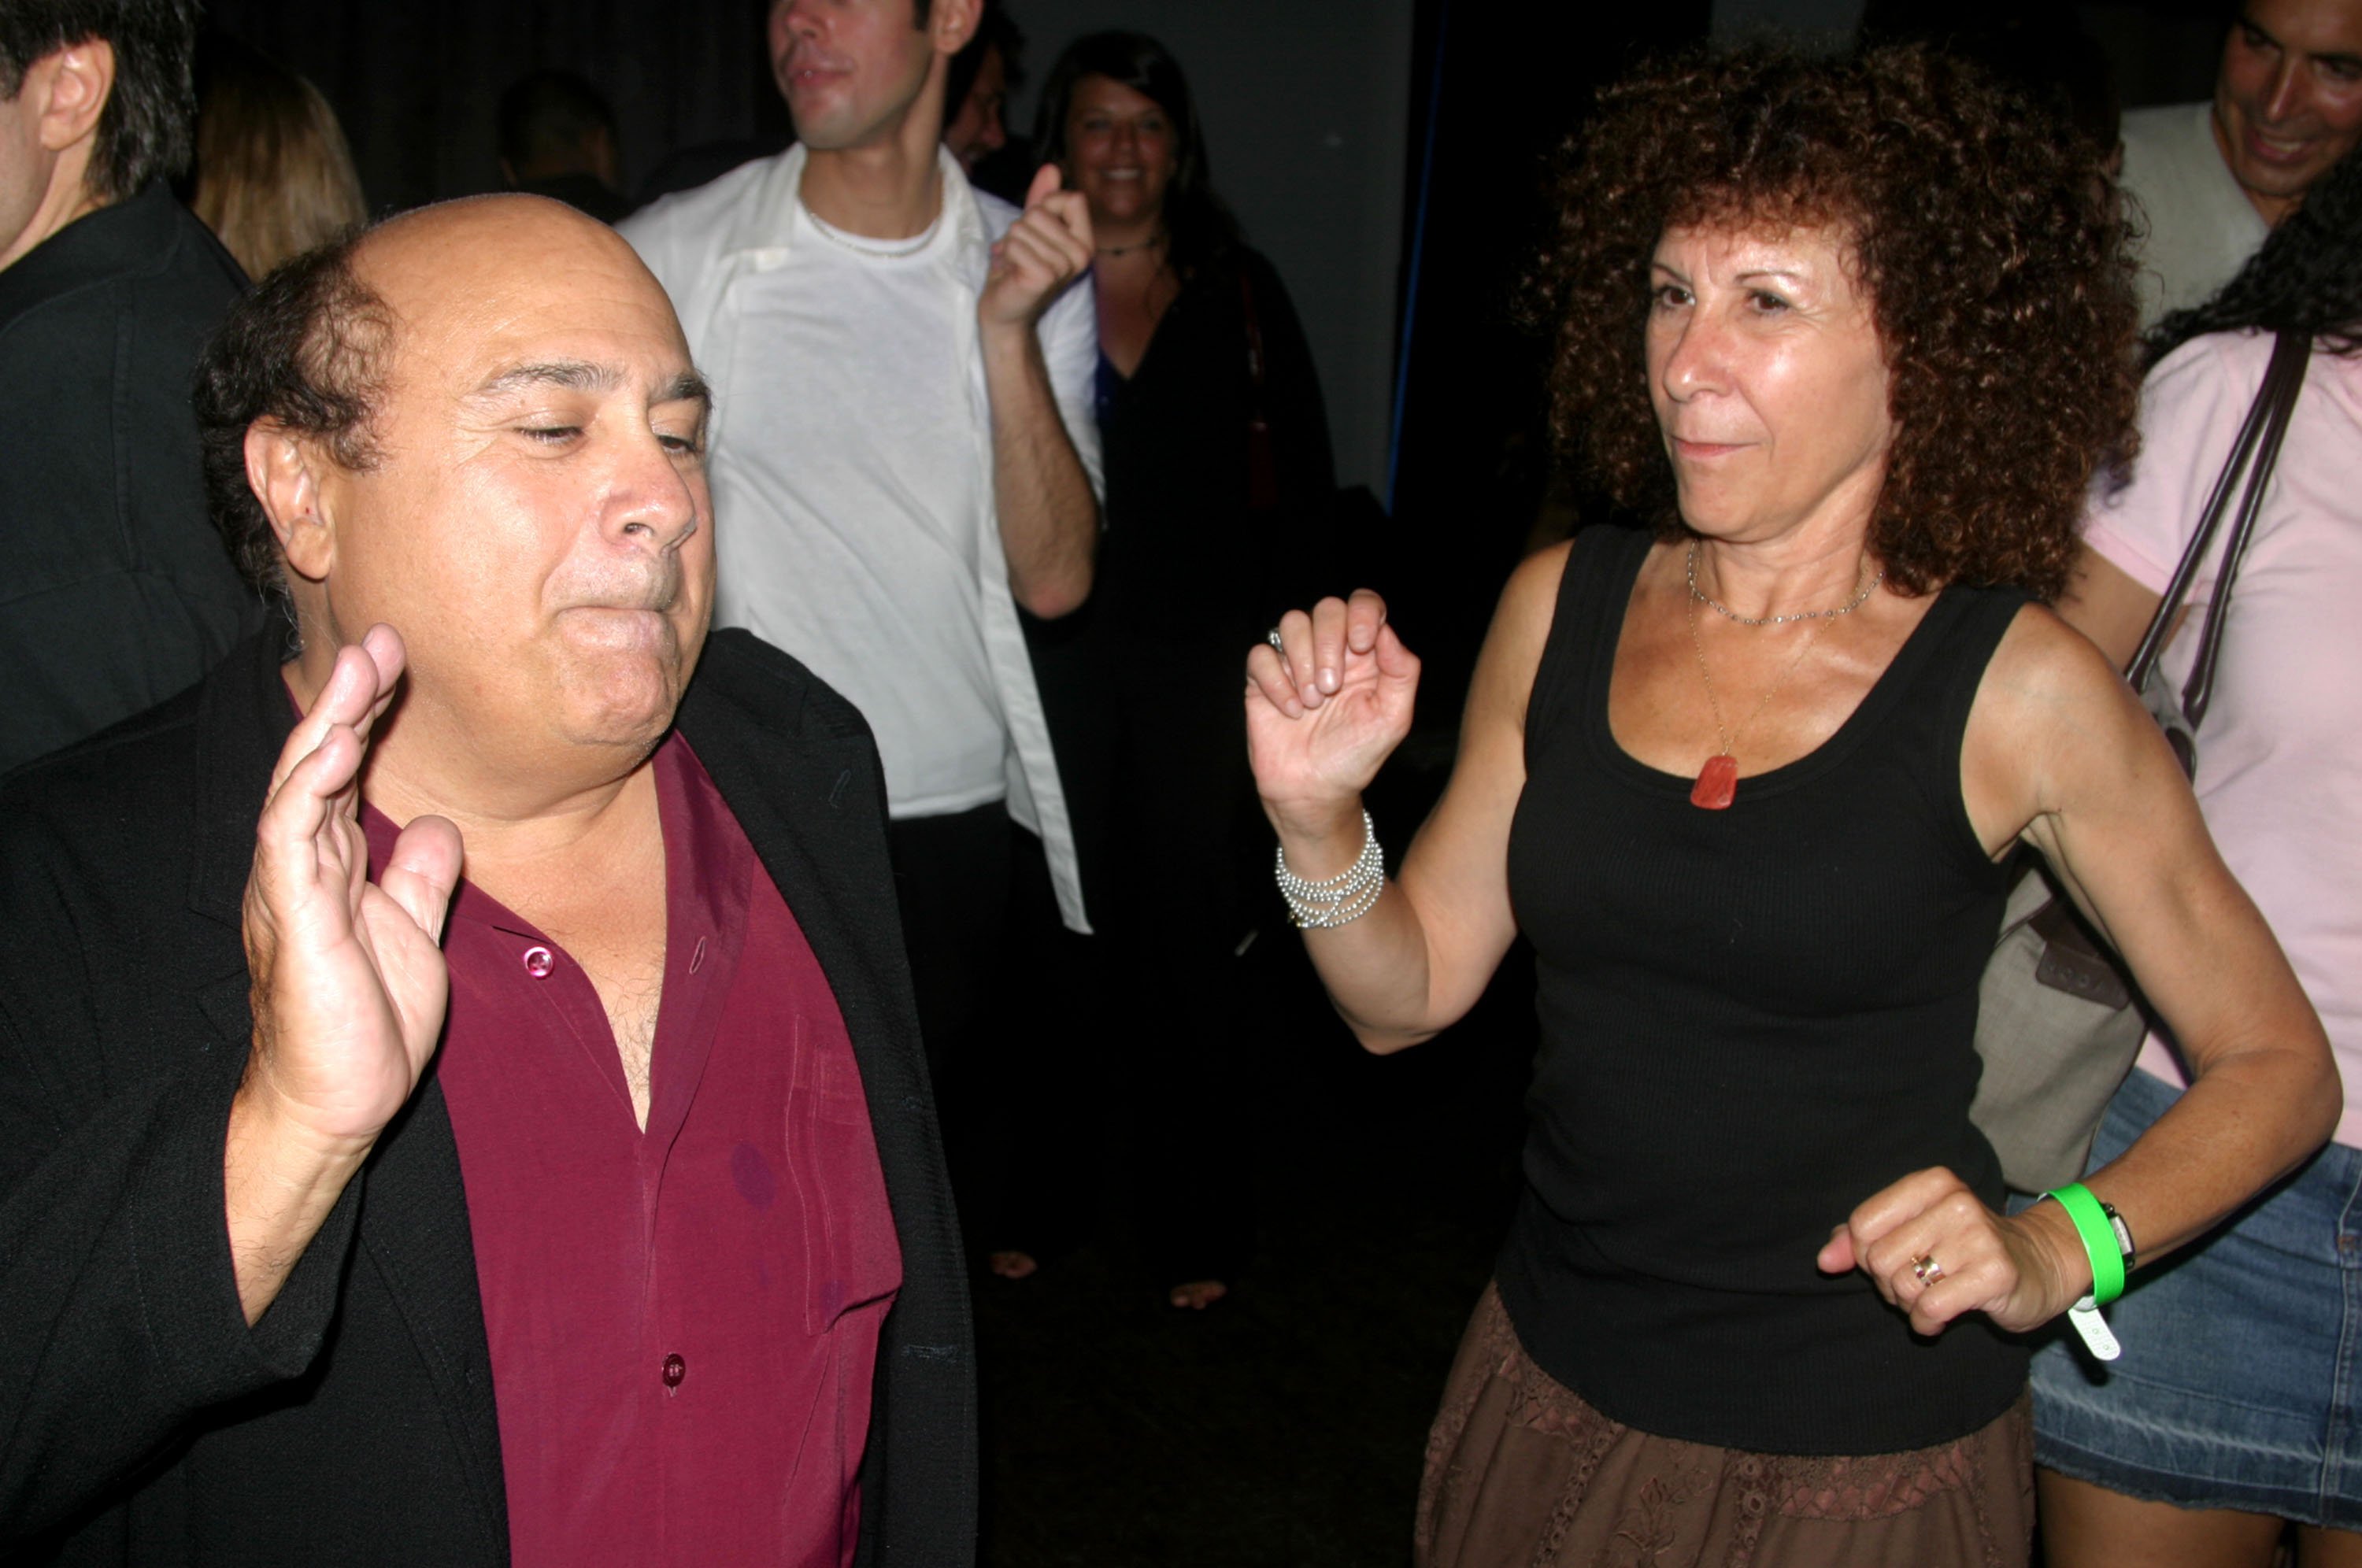 Danny DeVito, producer and wife Rhea Perlman during "Camp" New York Premiere - After Party at Vue in New York City, New York. Photo: Getty Images